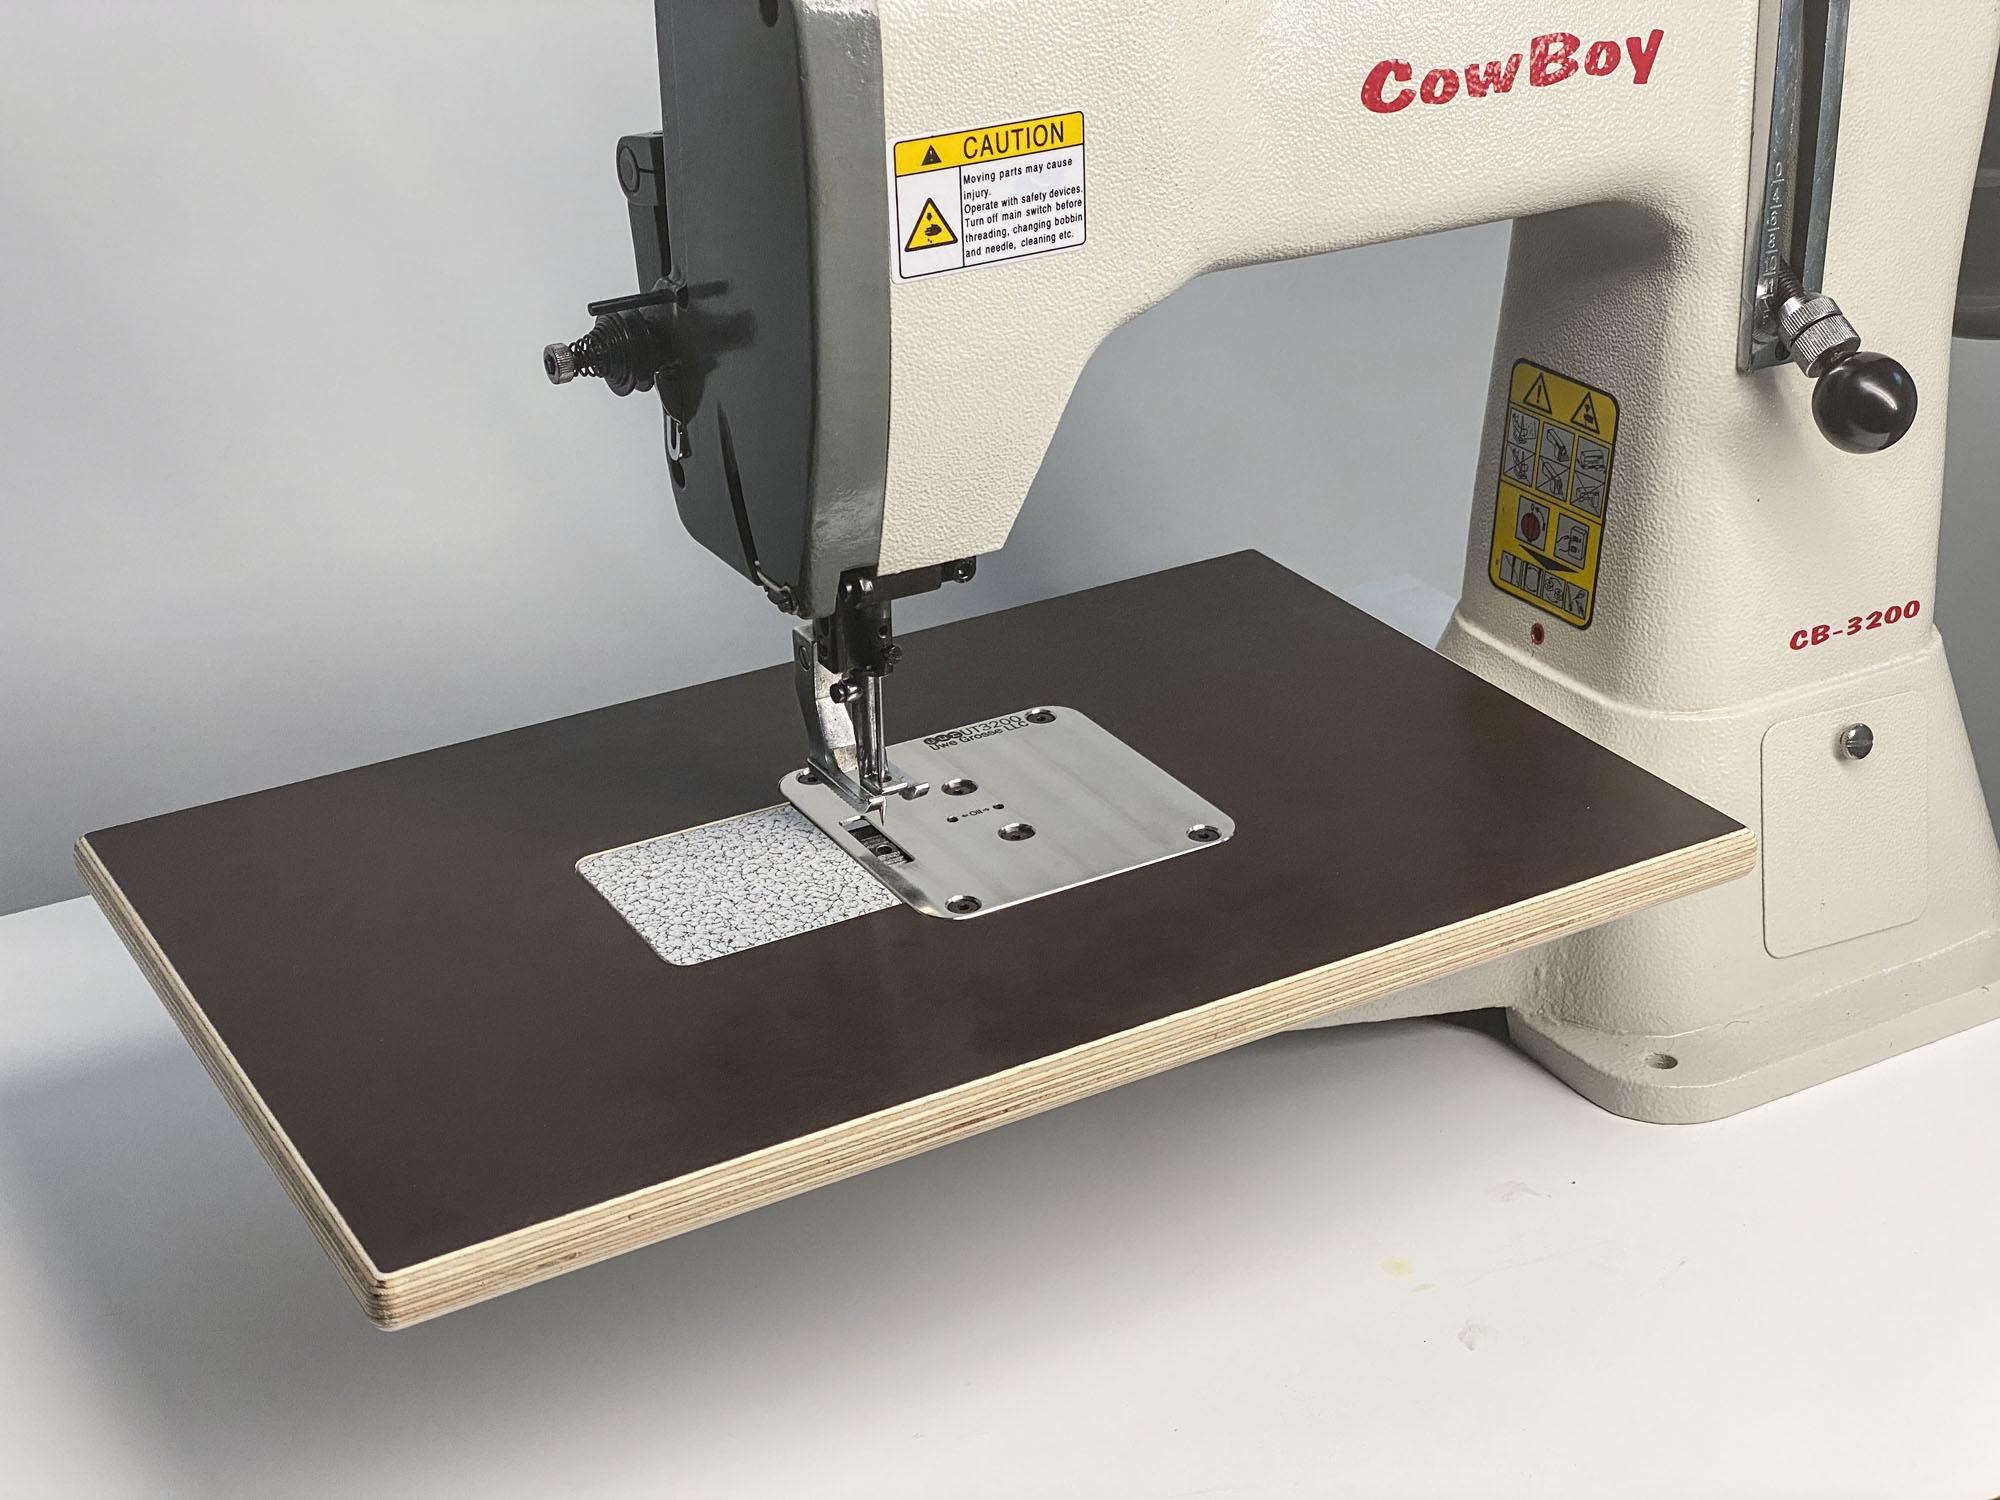 Cowboy Leather cutting Machines, featuring model CB-12